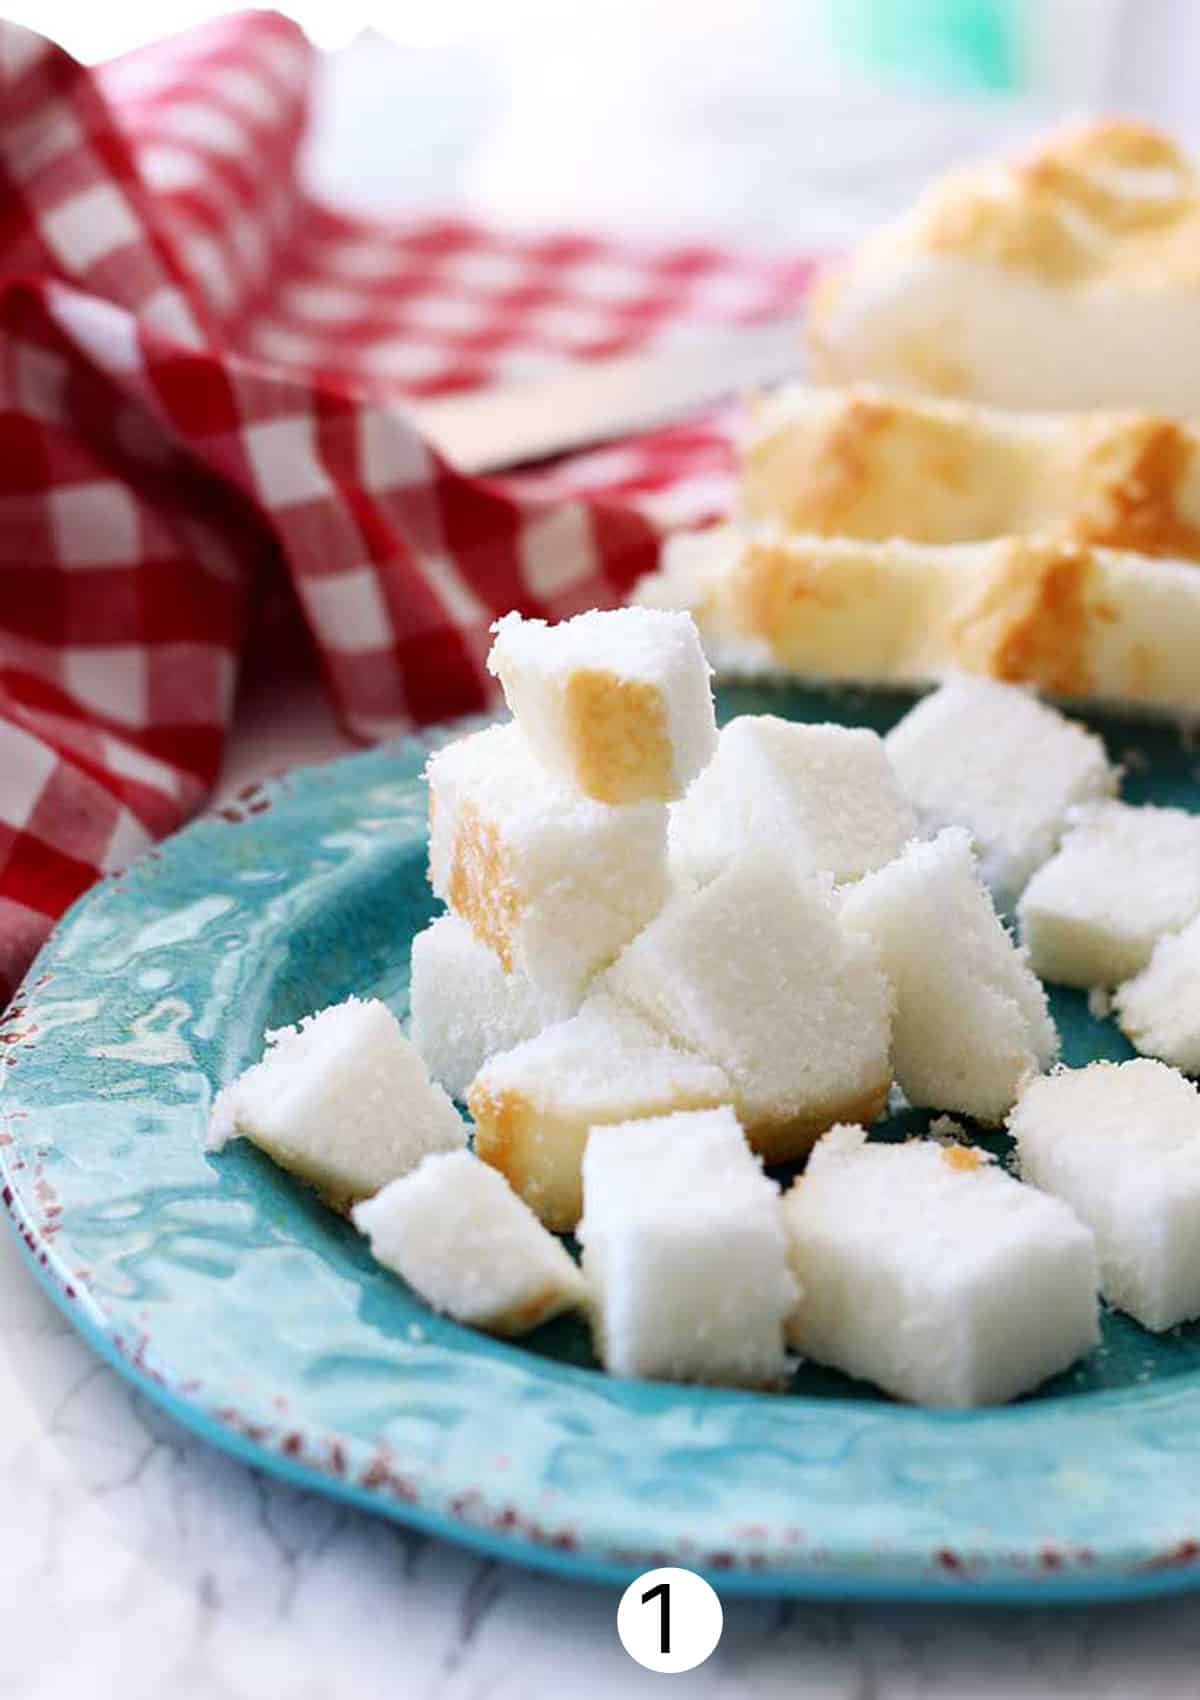 Cubed pieces of angel food cake on a plate.